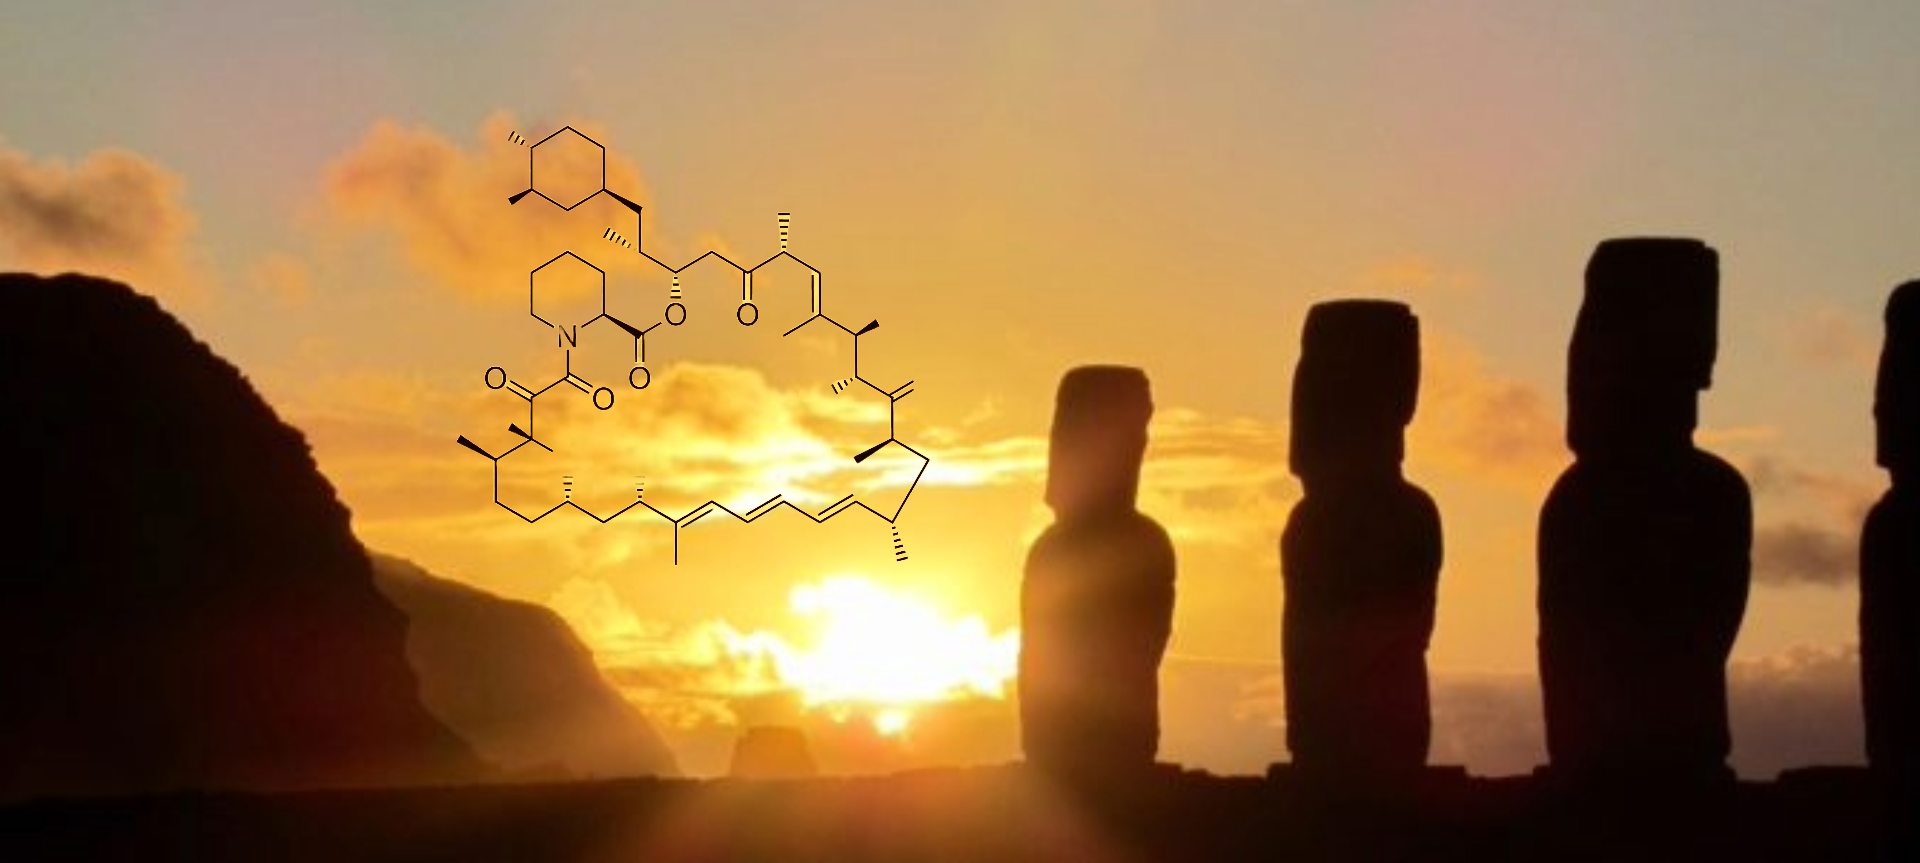 The famous statues of Easter Island where Rapamycin was discovered